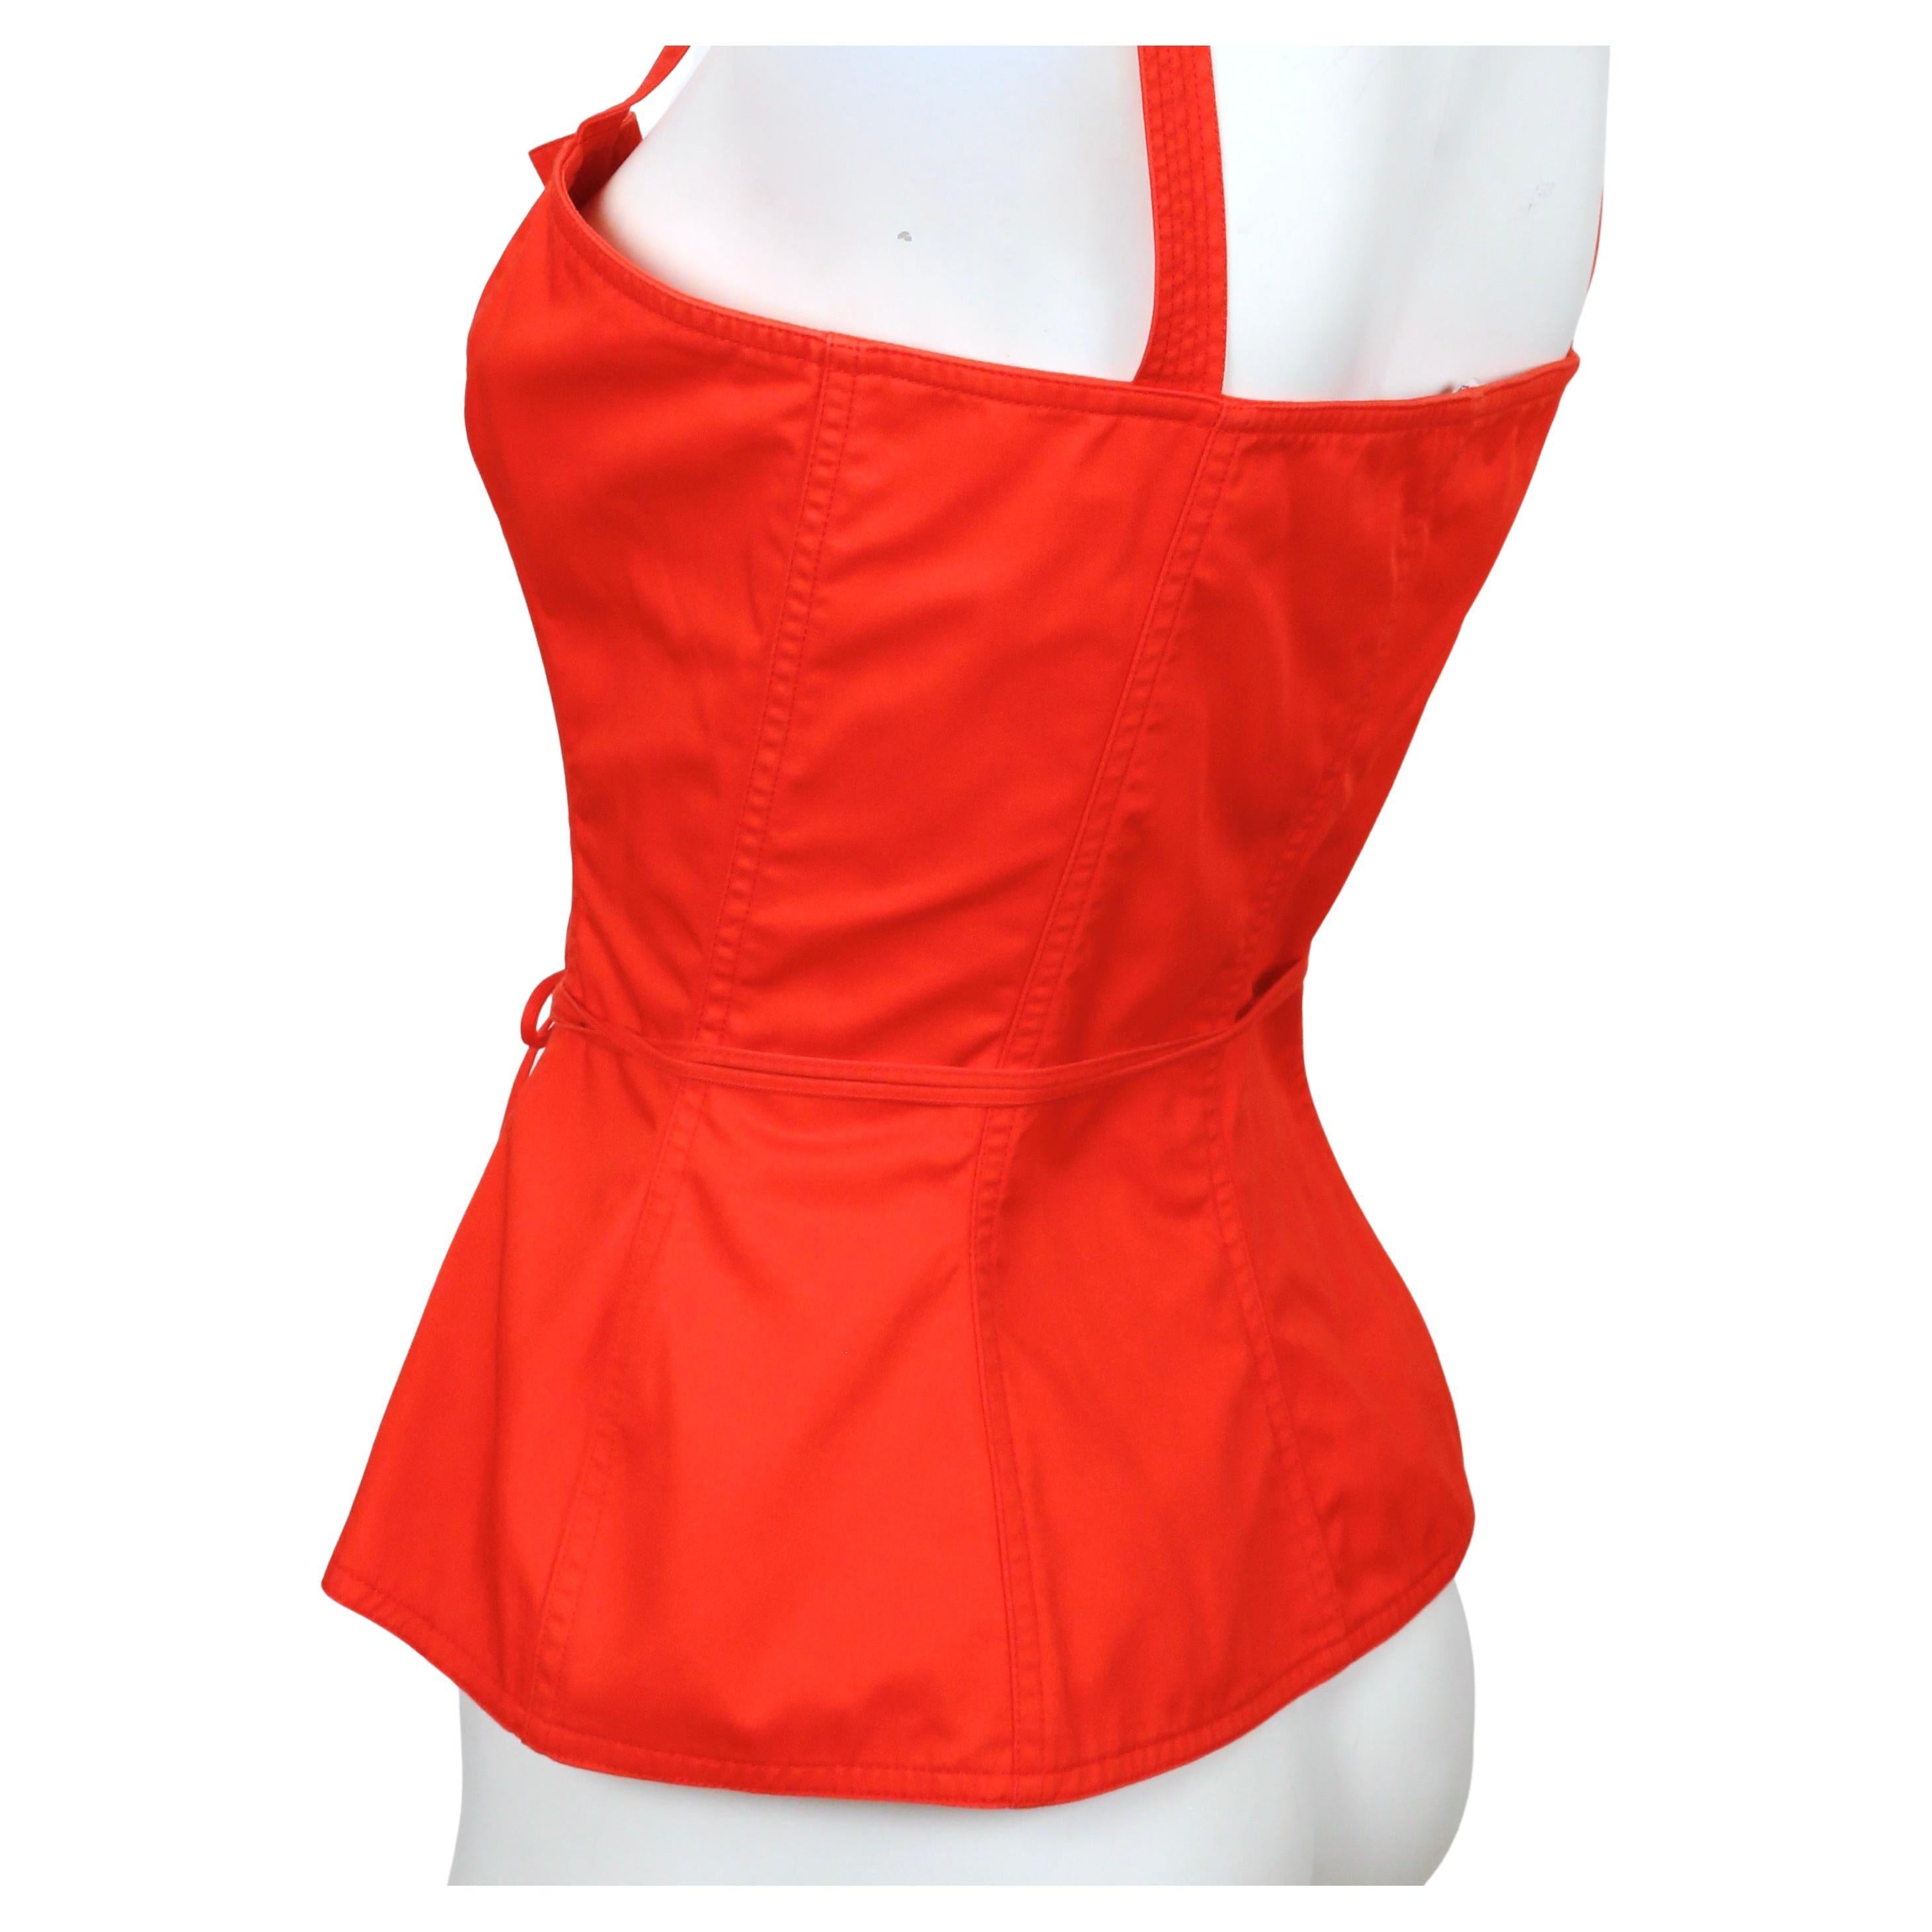 Red cotton bustier top with metal grommets designed by Yves Saint Laurent dating to 1977 exactly as seen on the runway and in numerous editorials including one of Farah Fawcett. Best fits a size 4 to 6 (maximum bust of 33.5